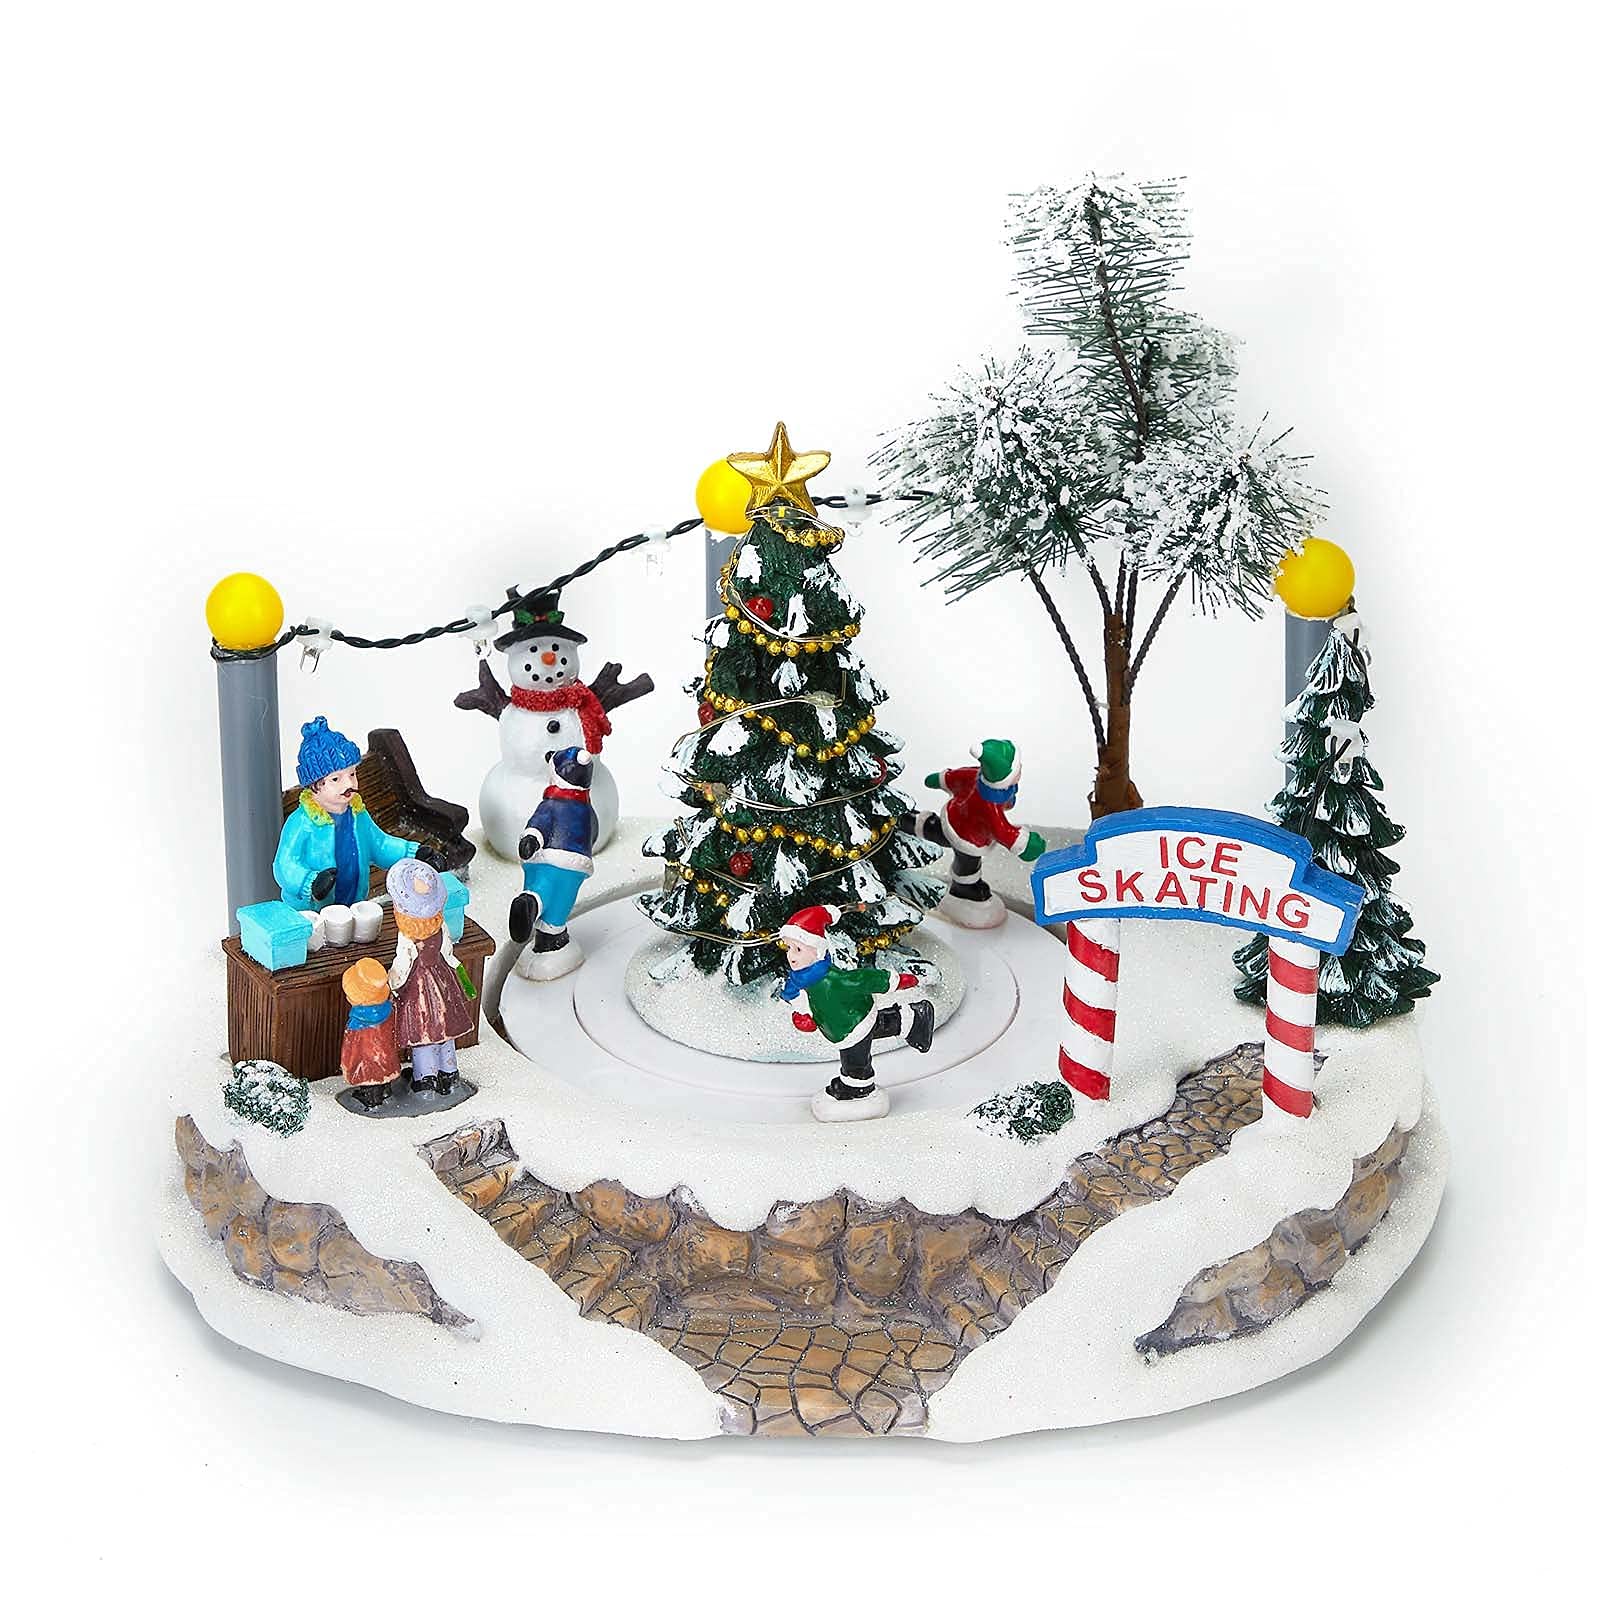 innodept12 Winter LED-Lighted Christmas Village Scene, Illuminated & Animated Lighted Musical Christmas Village with Center Tree and Moving Ice Skating Rink Decoration, Battery Operated